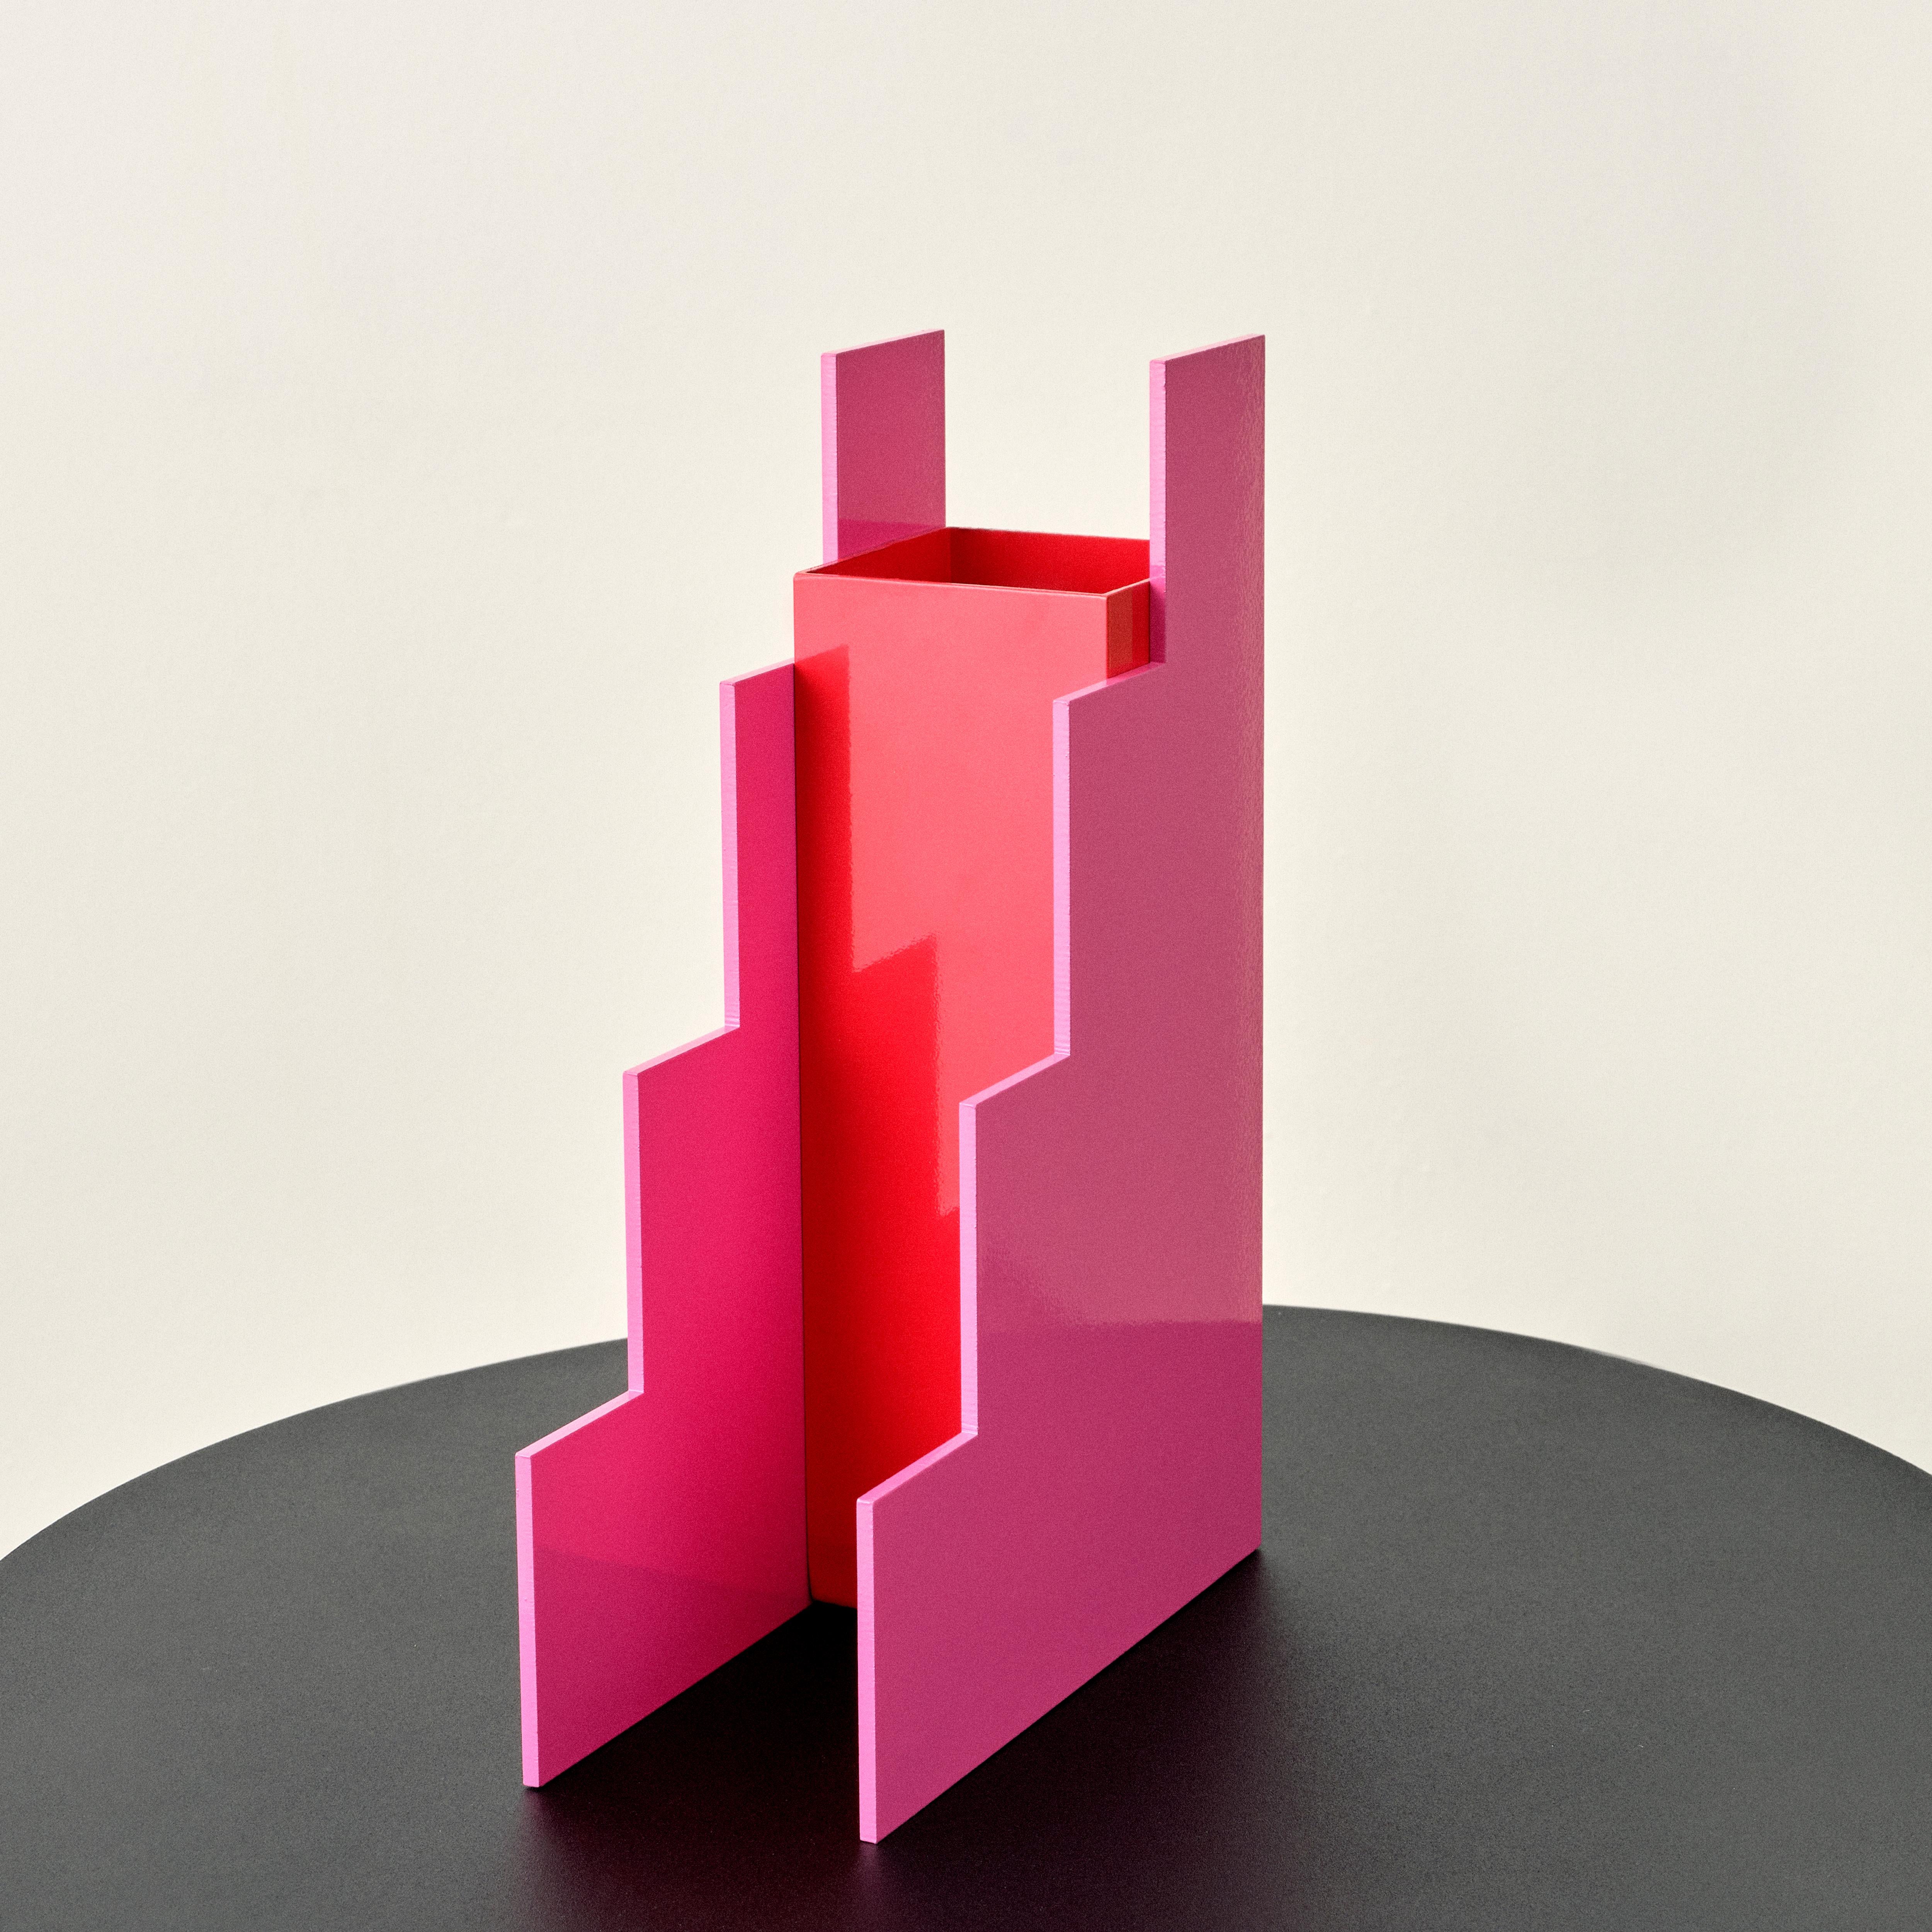 Animate Object's vase collection is inspired by the idea of abstract cut-out shapes and forms coming together to create unique decors. The Scala vase, inspired by geometric architecture and shaped like a staircase, is a cute little reminder to stay